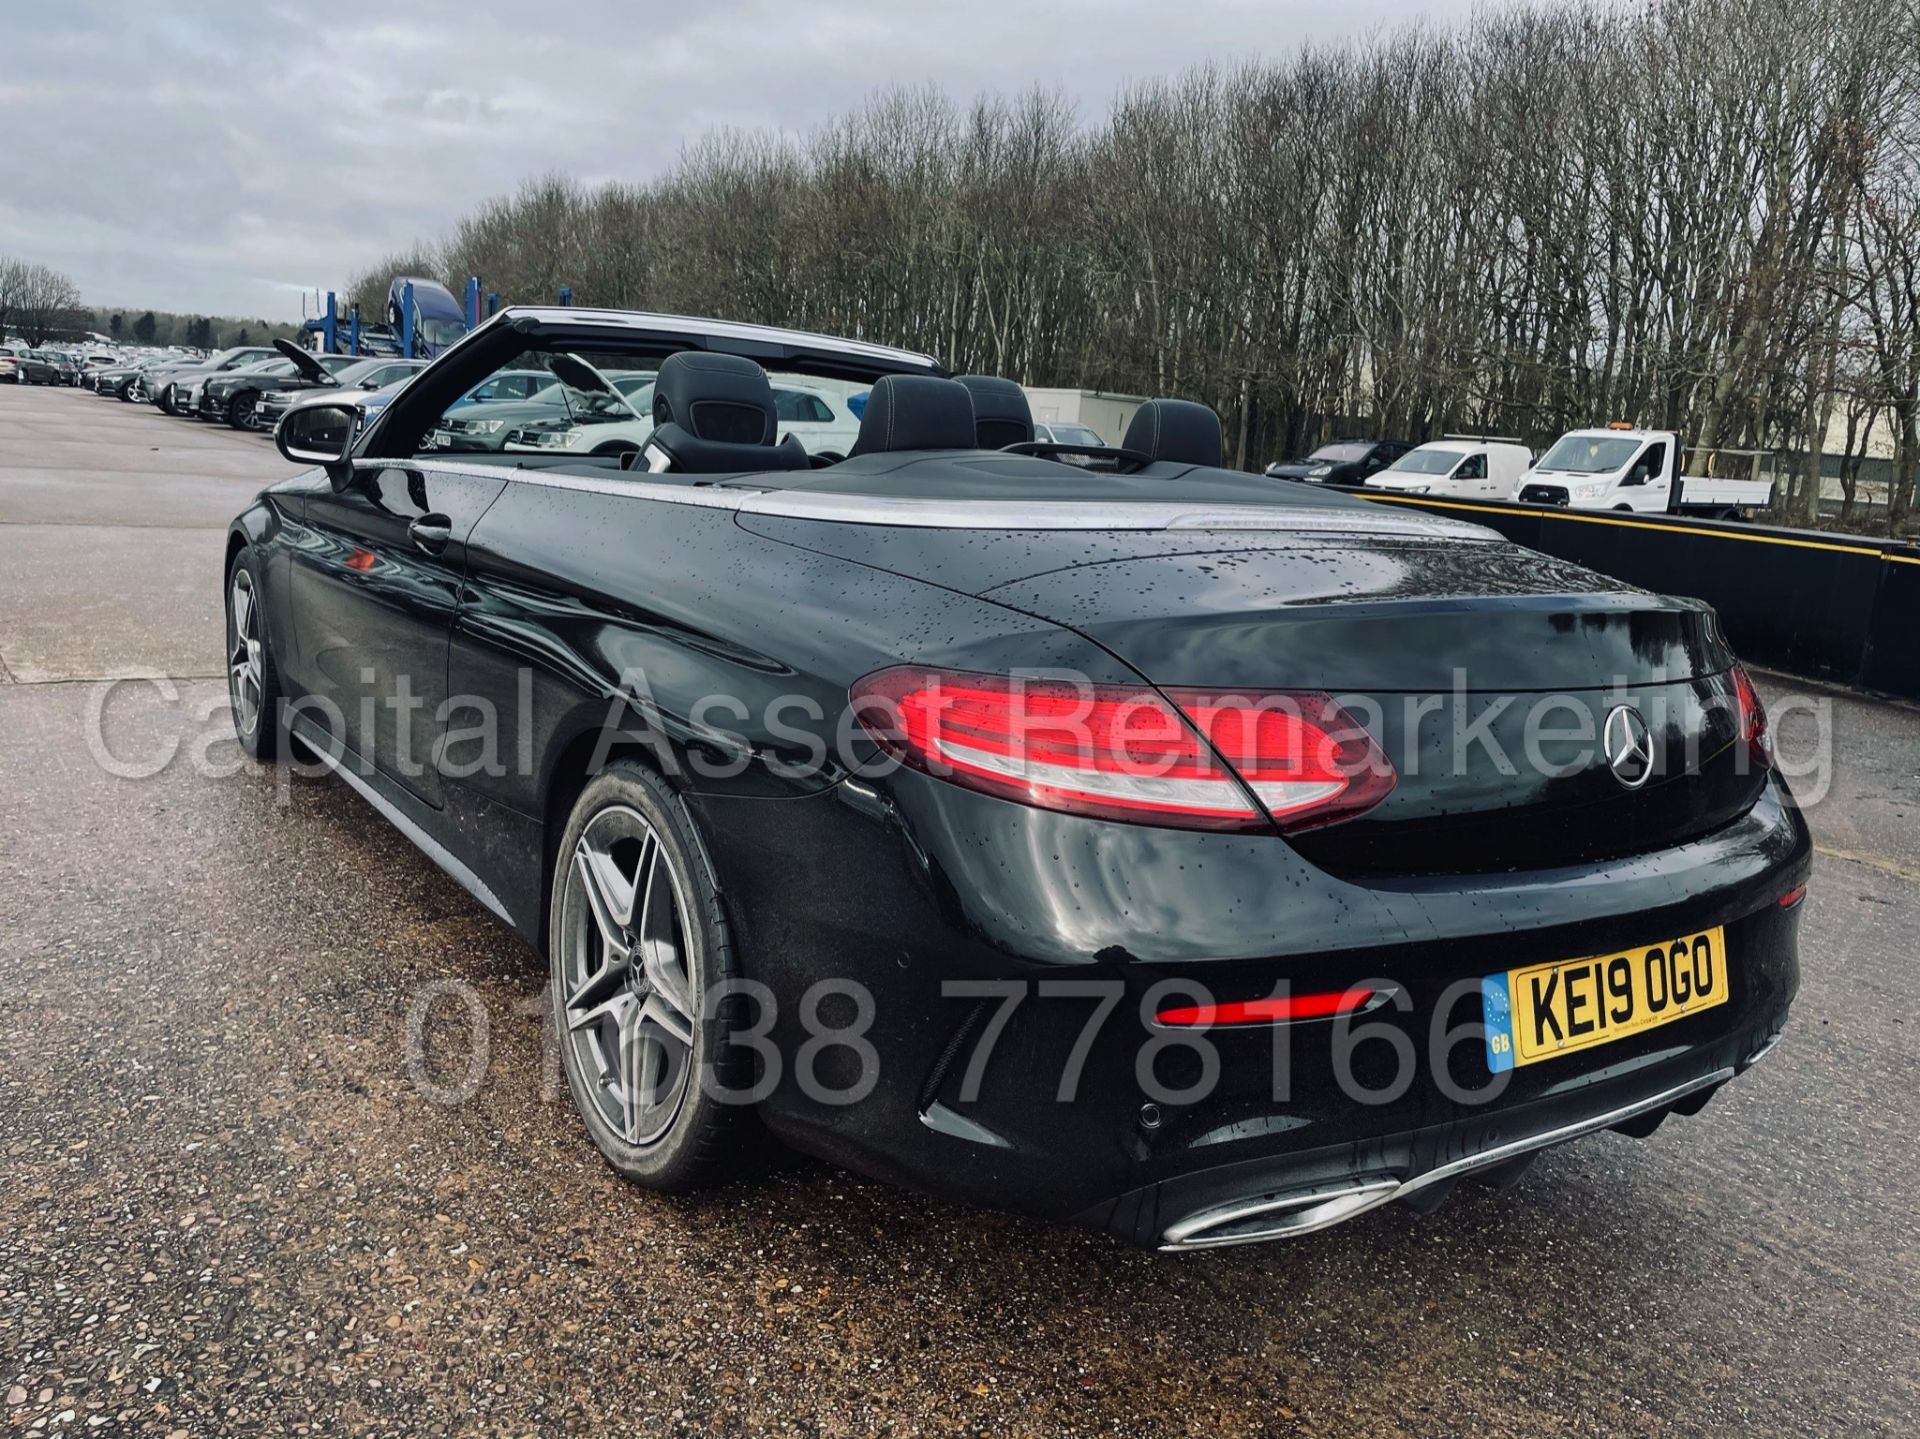 (ON SALE) MERCEDES-BENZ C220D *AMG LINE - CABRIOLET* (2019) '9G TRONIC AUTO - LEATHER - SAT NAV' - Image 11 of 56